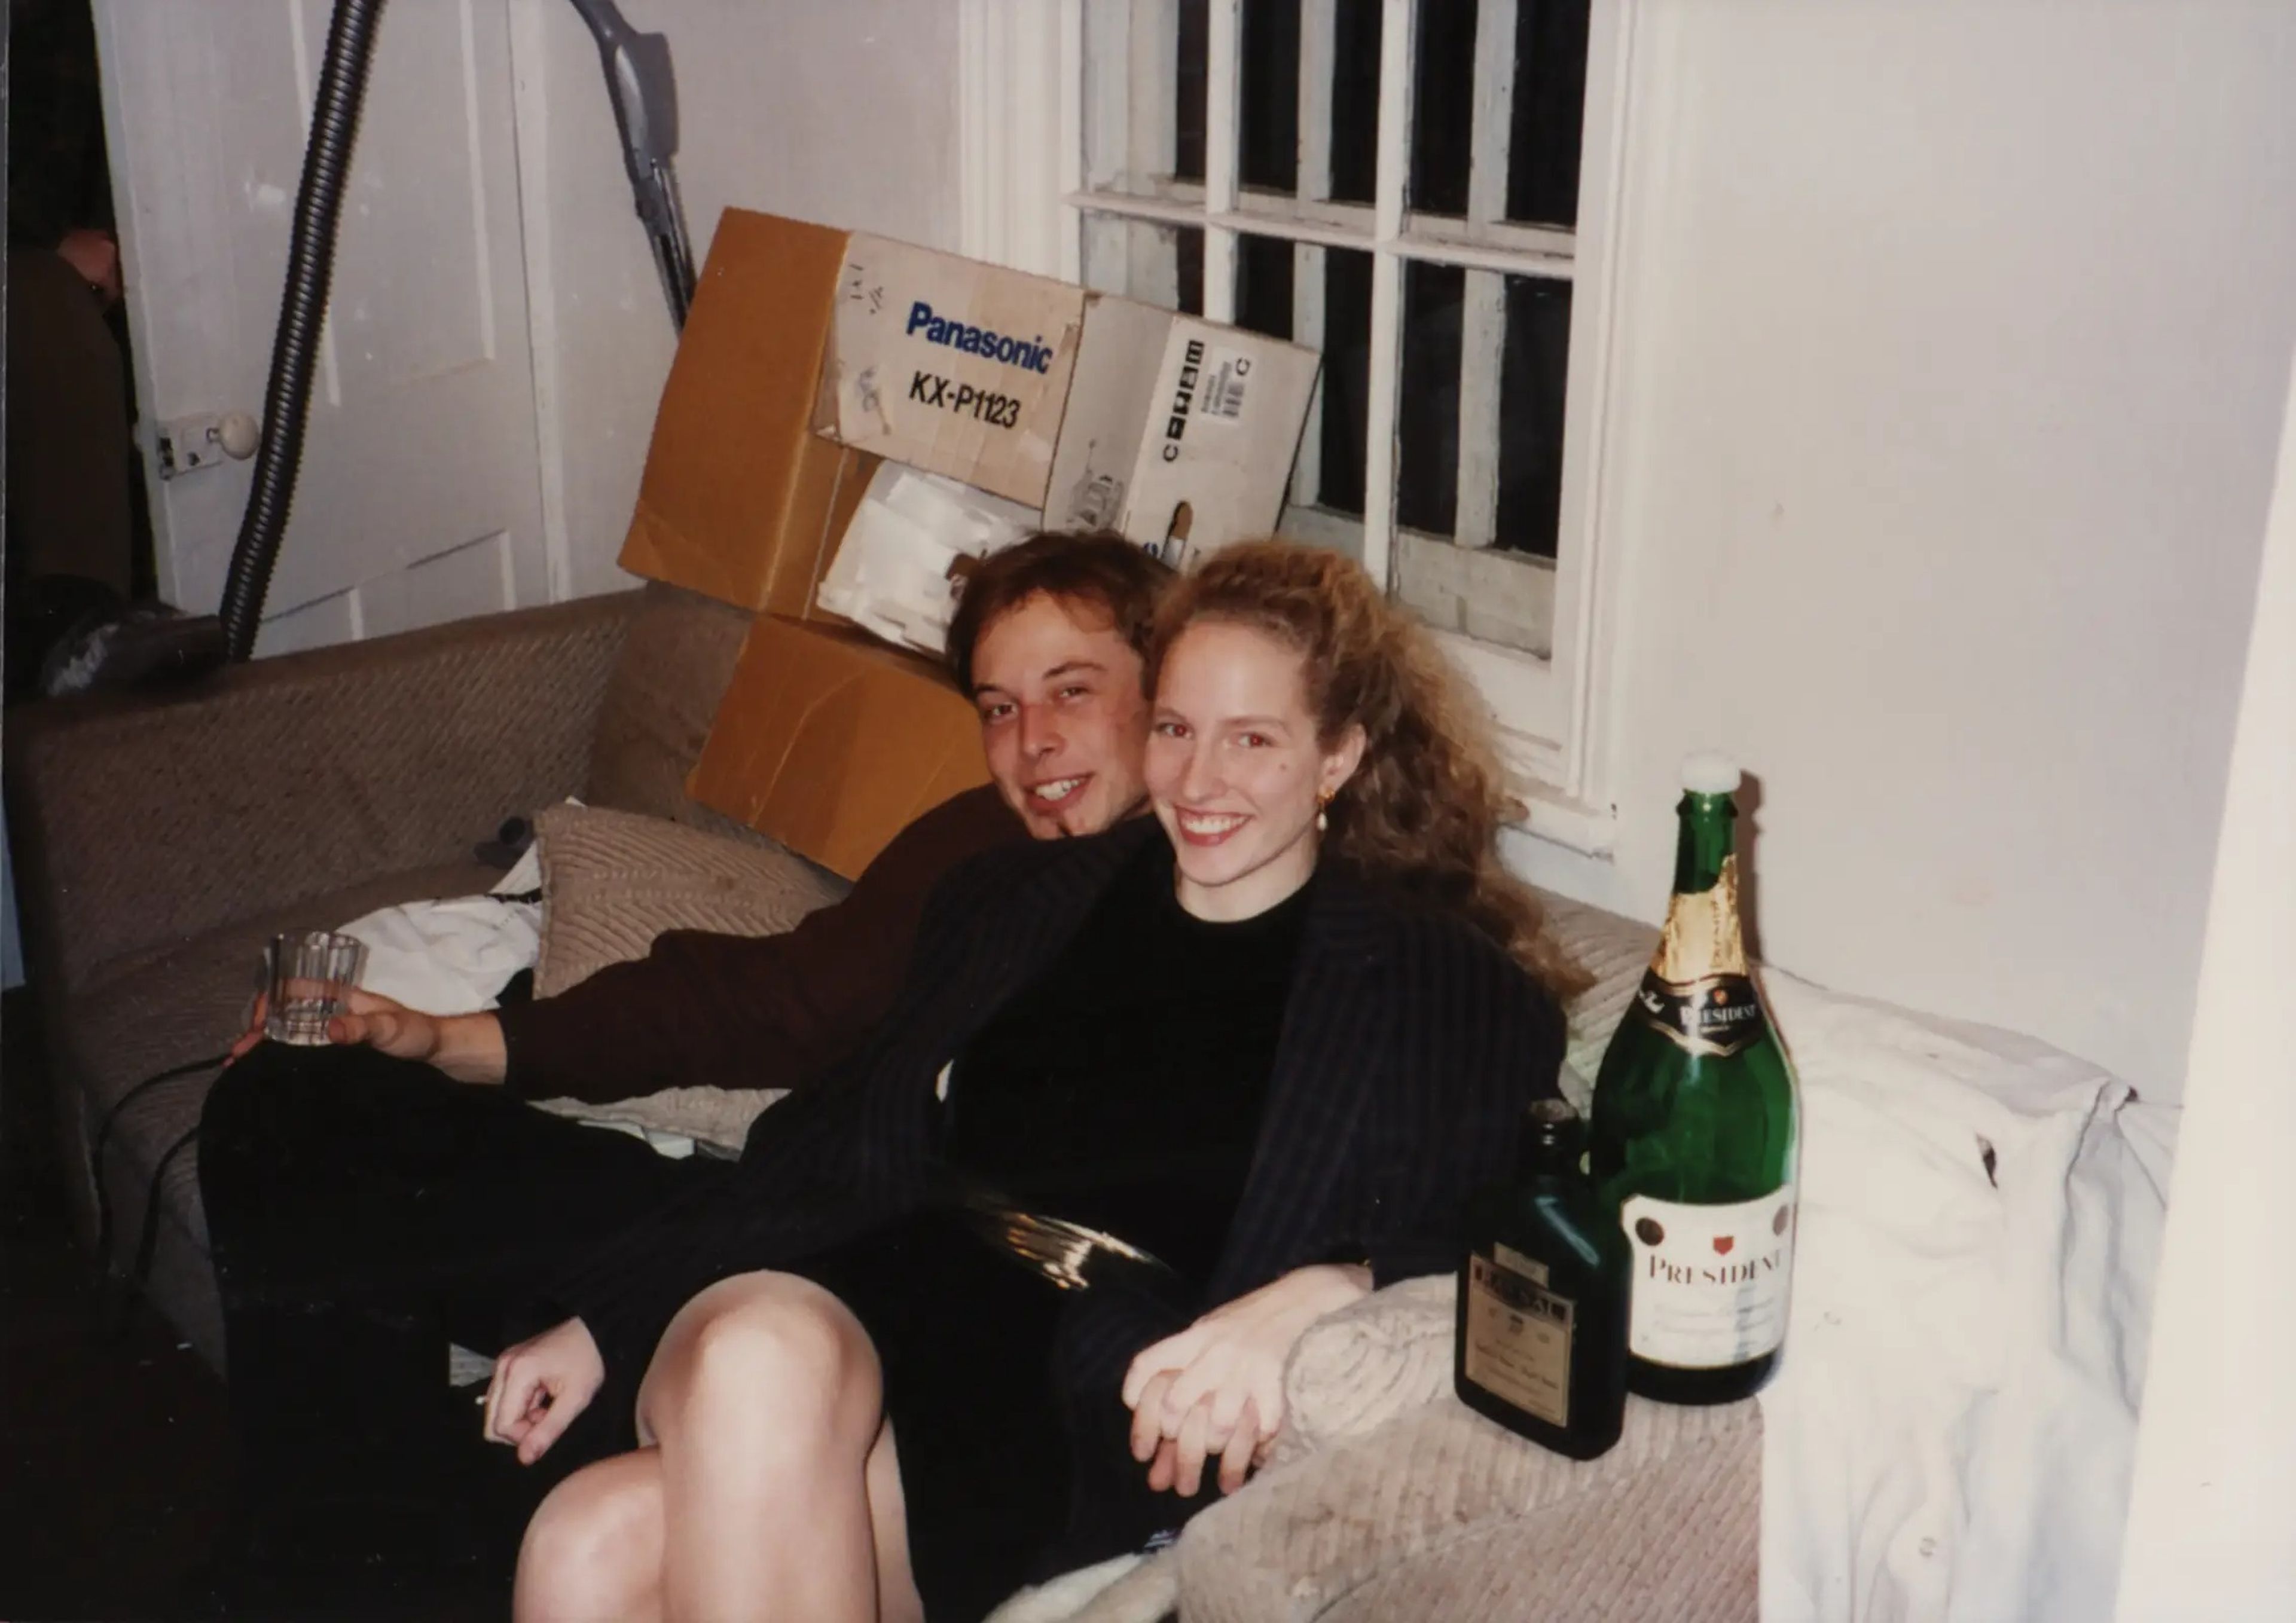 Elon Musk having a drink on a couch with his then-girlfriend.